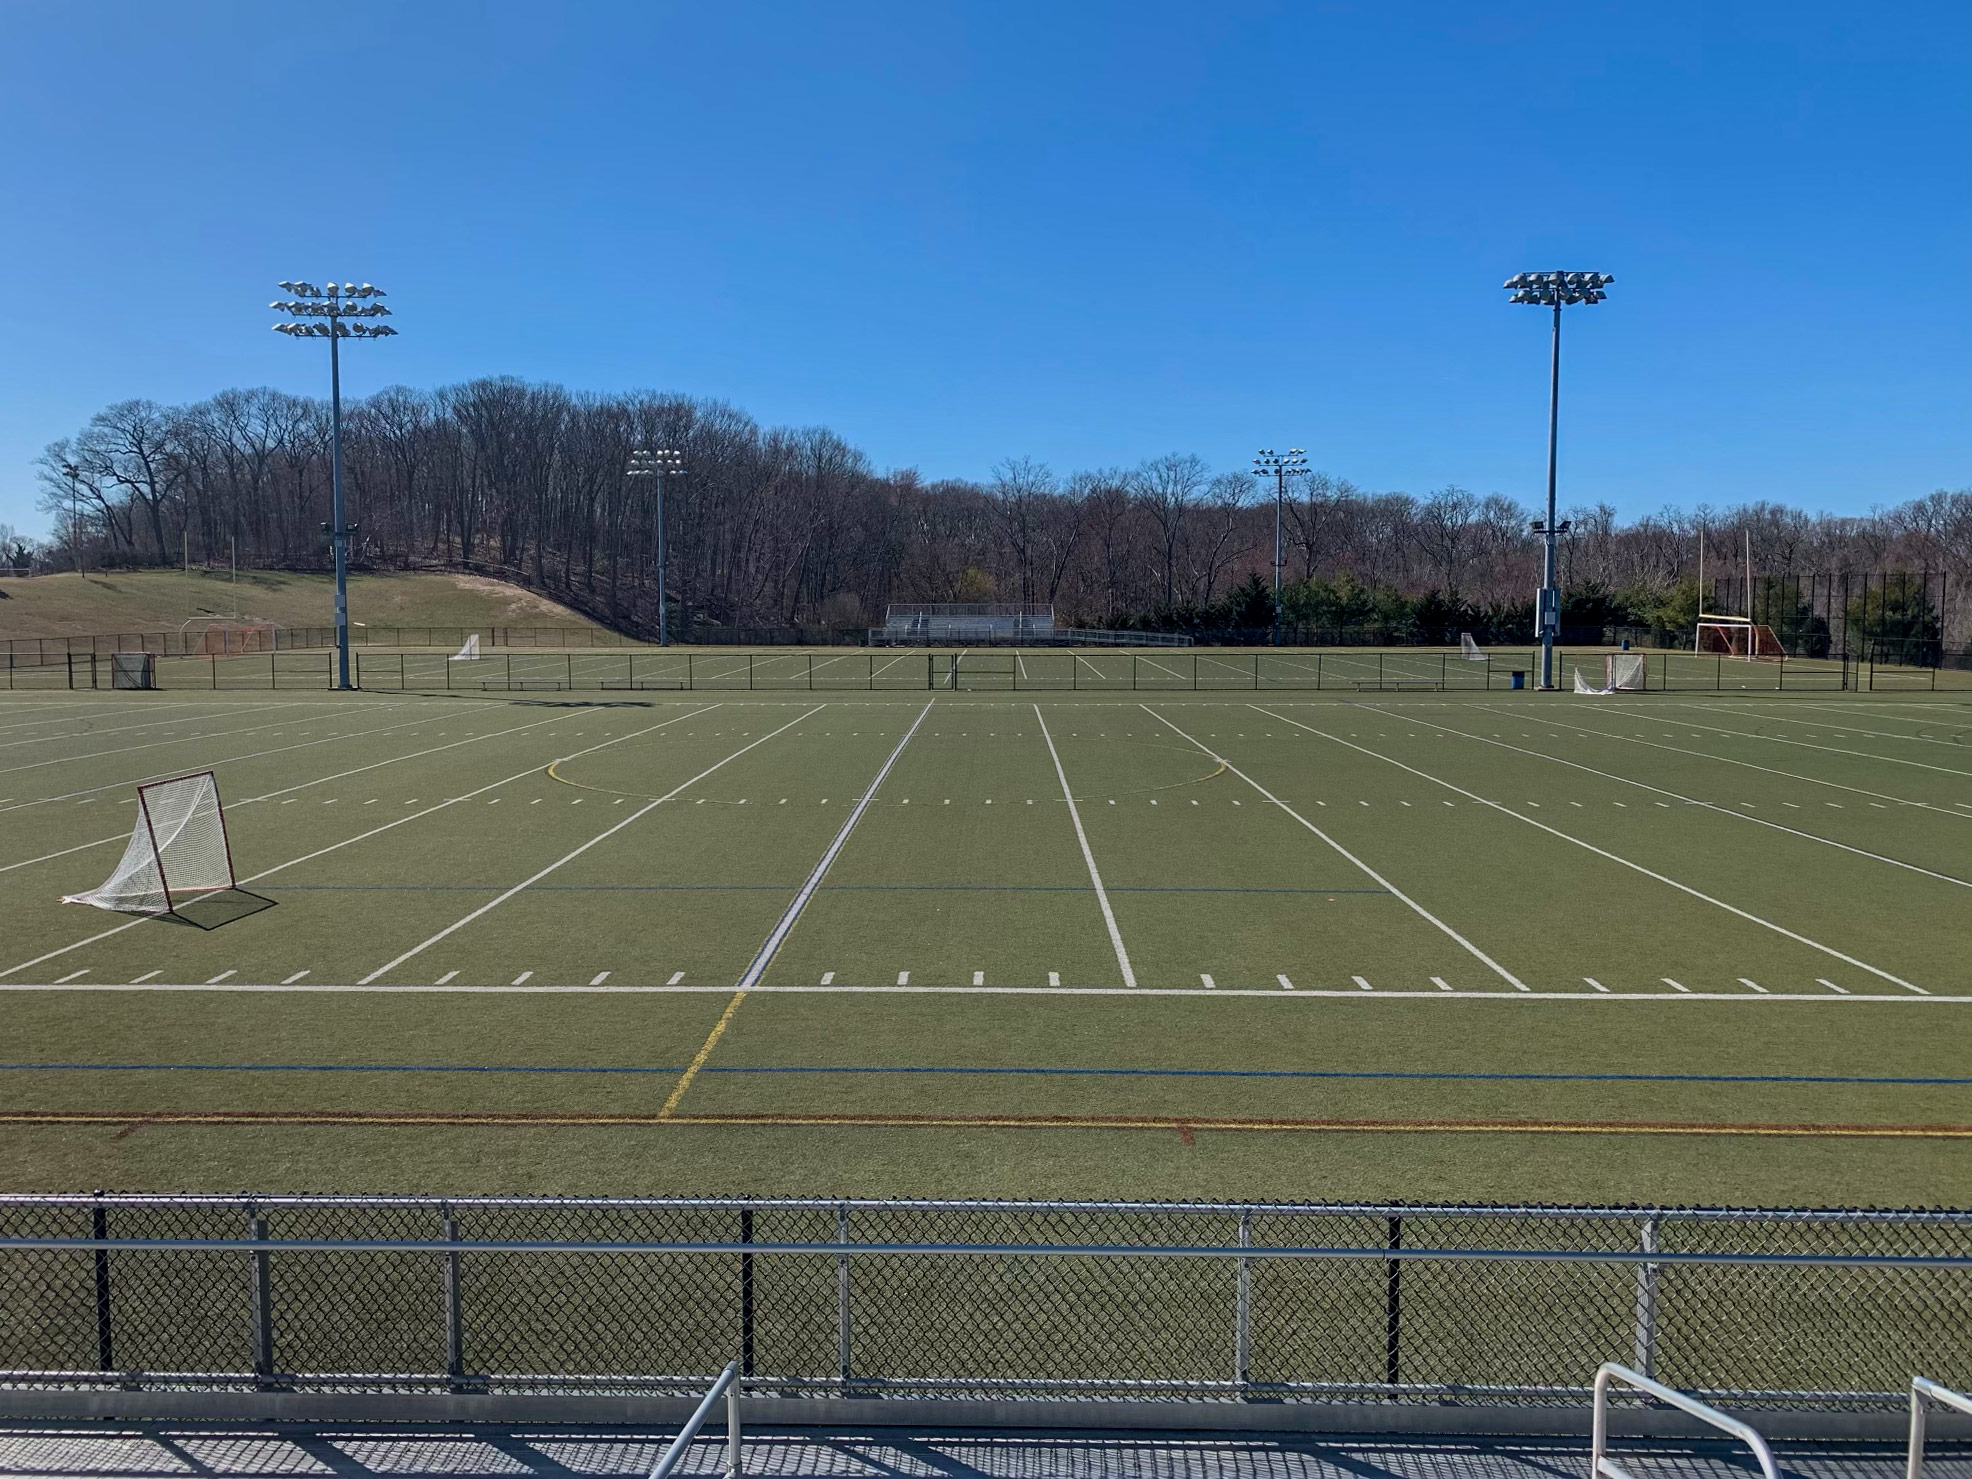 A conflict between two of the community’s football clubs over field usage at Veteran’s Park in East Northport is nearing a potential resolution, as TOH leaders look to craft a compromise that satisfies both leagues.